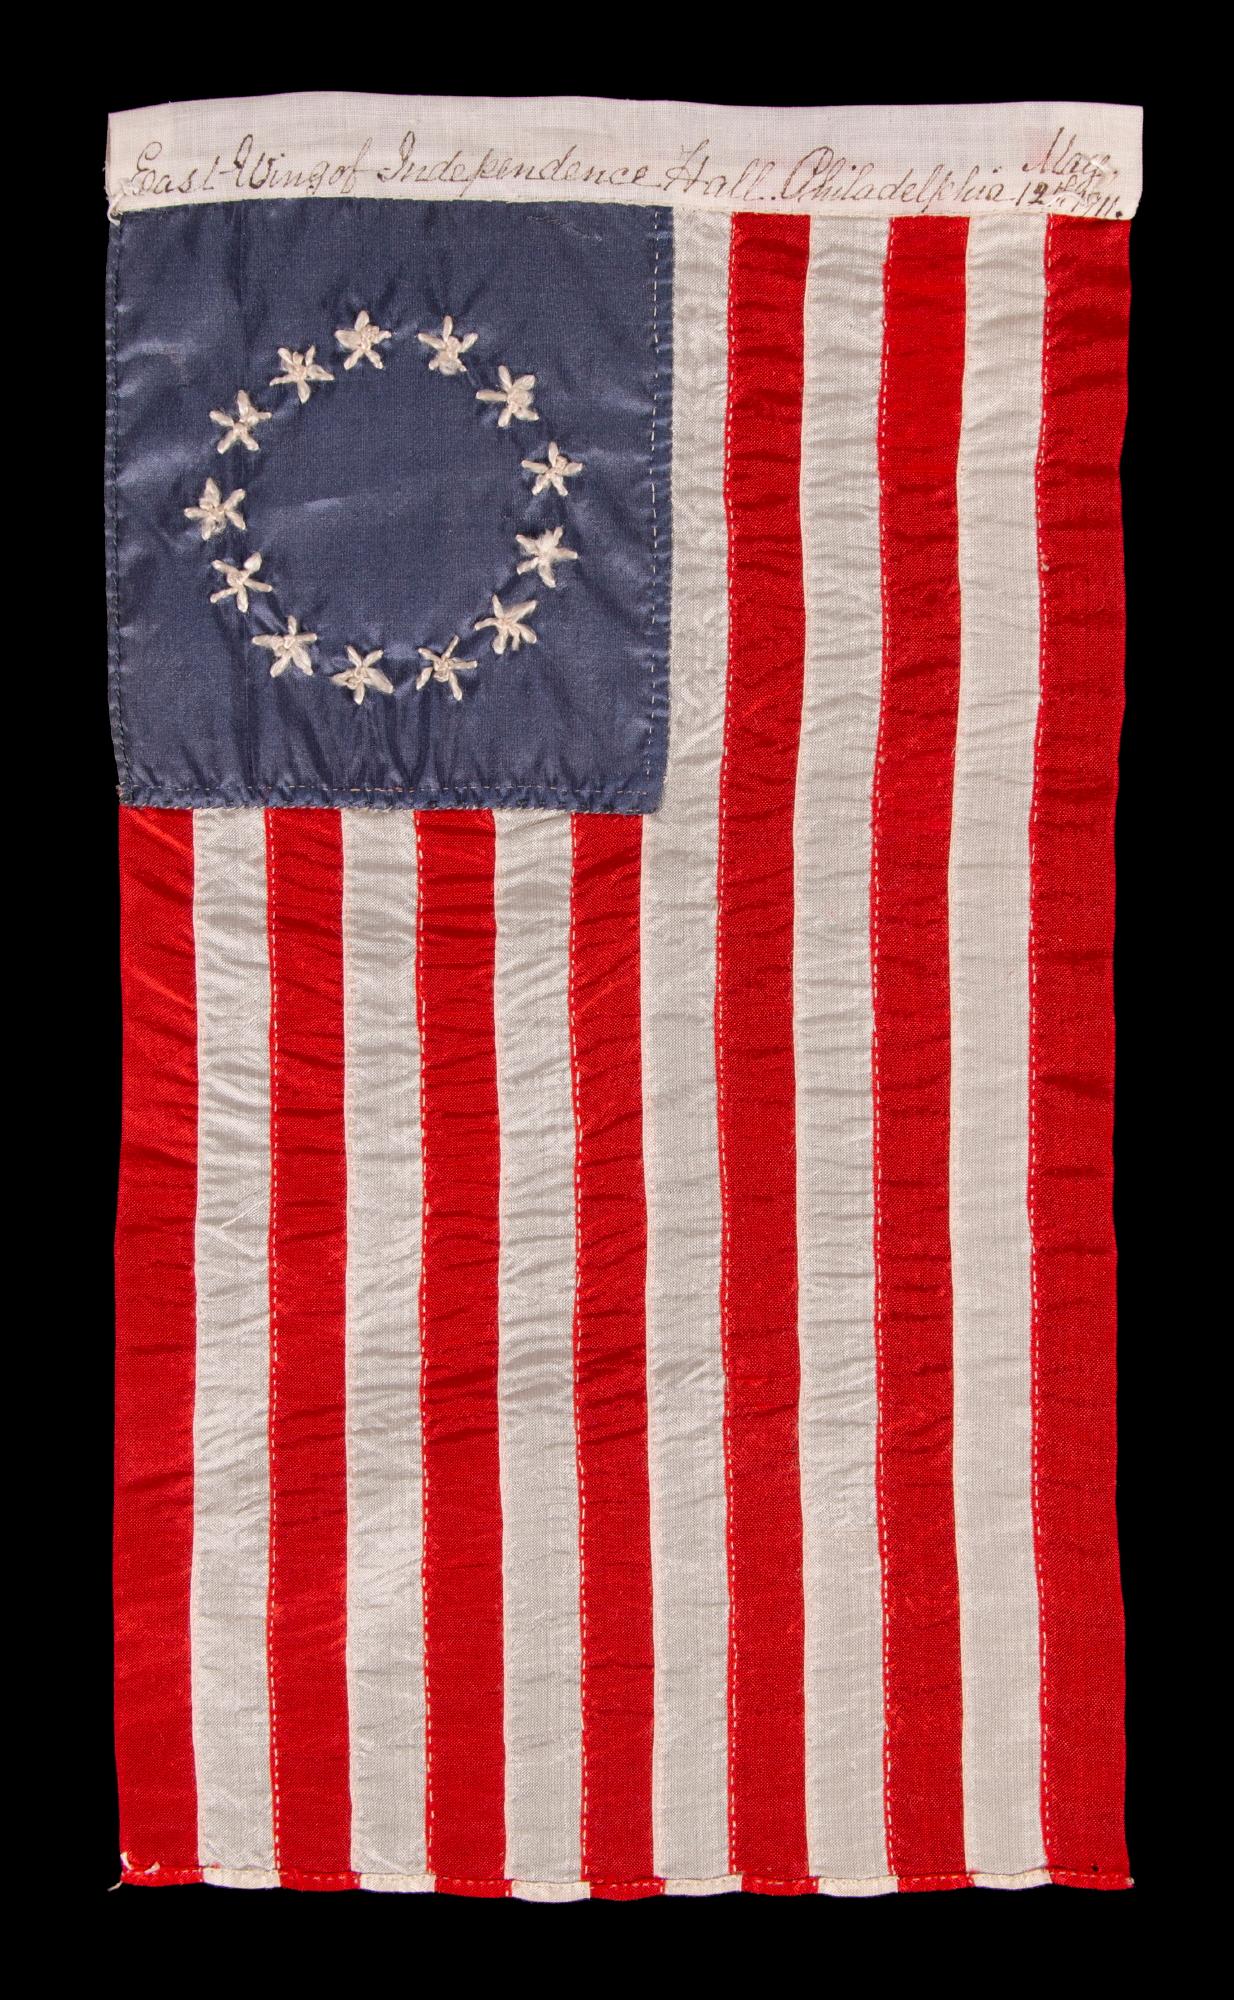 how old was betsy ross when she made the flag